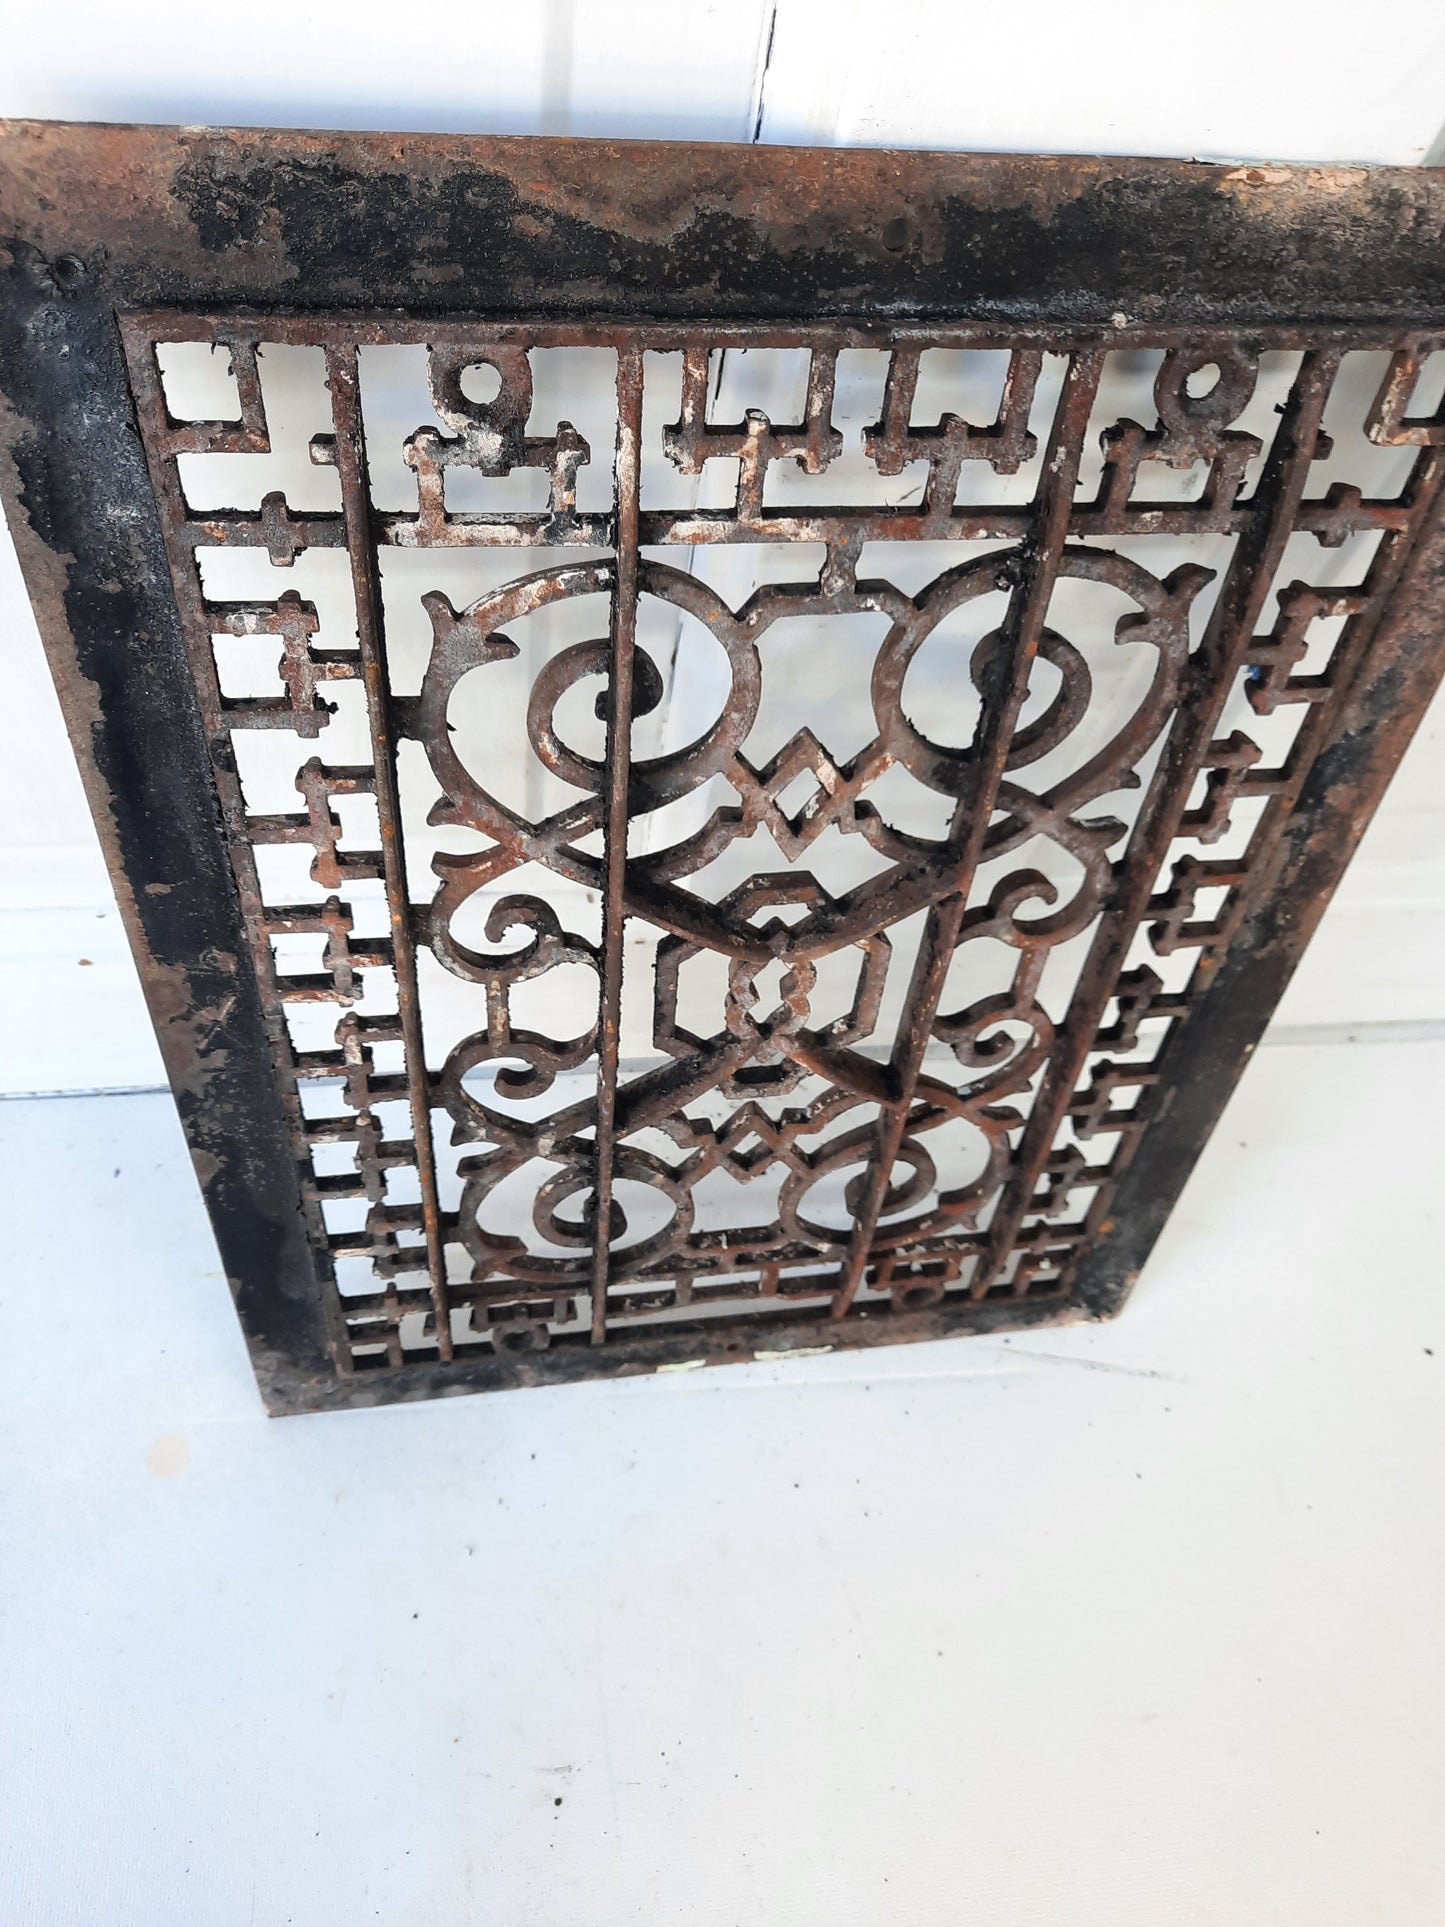 11 x 14 Antique Cast Iron Vent Cover, Floor Register Cover with Scroll Design #010203